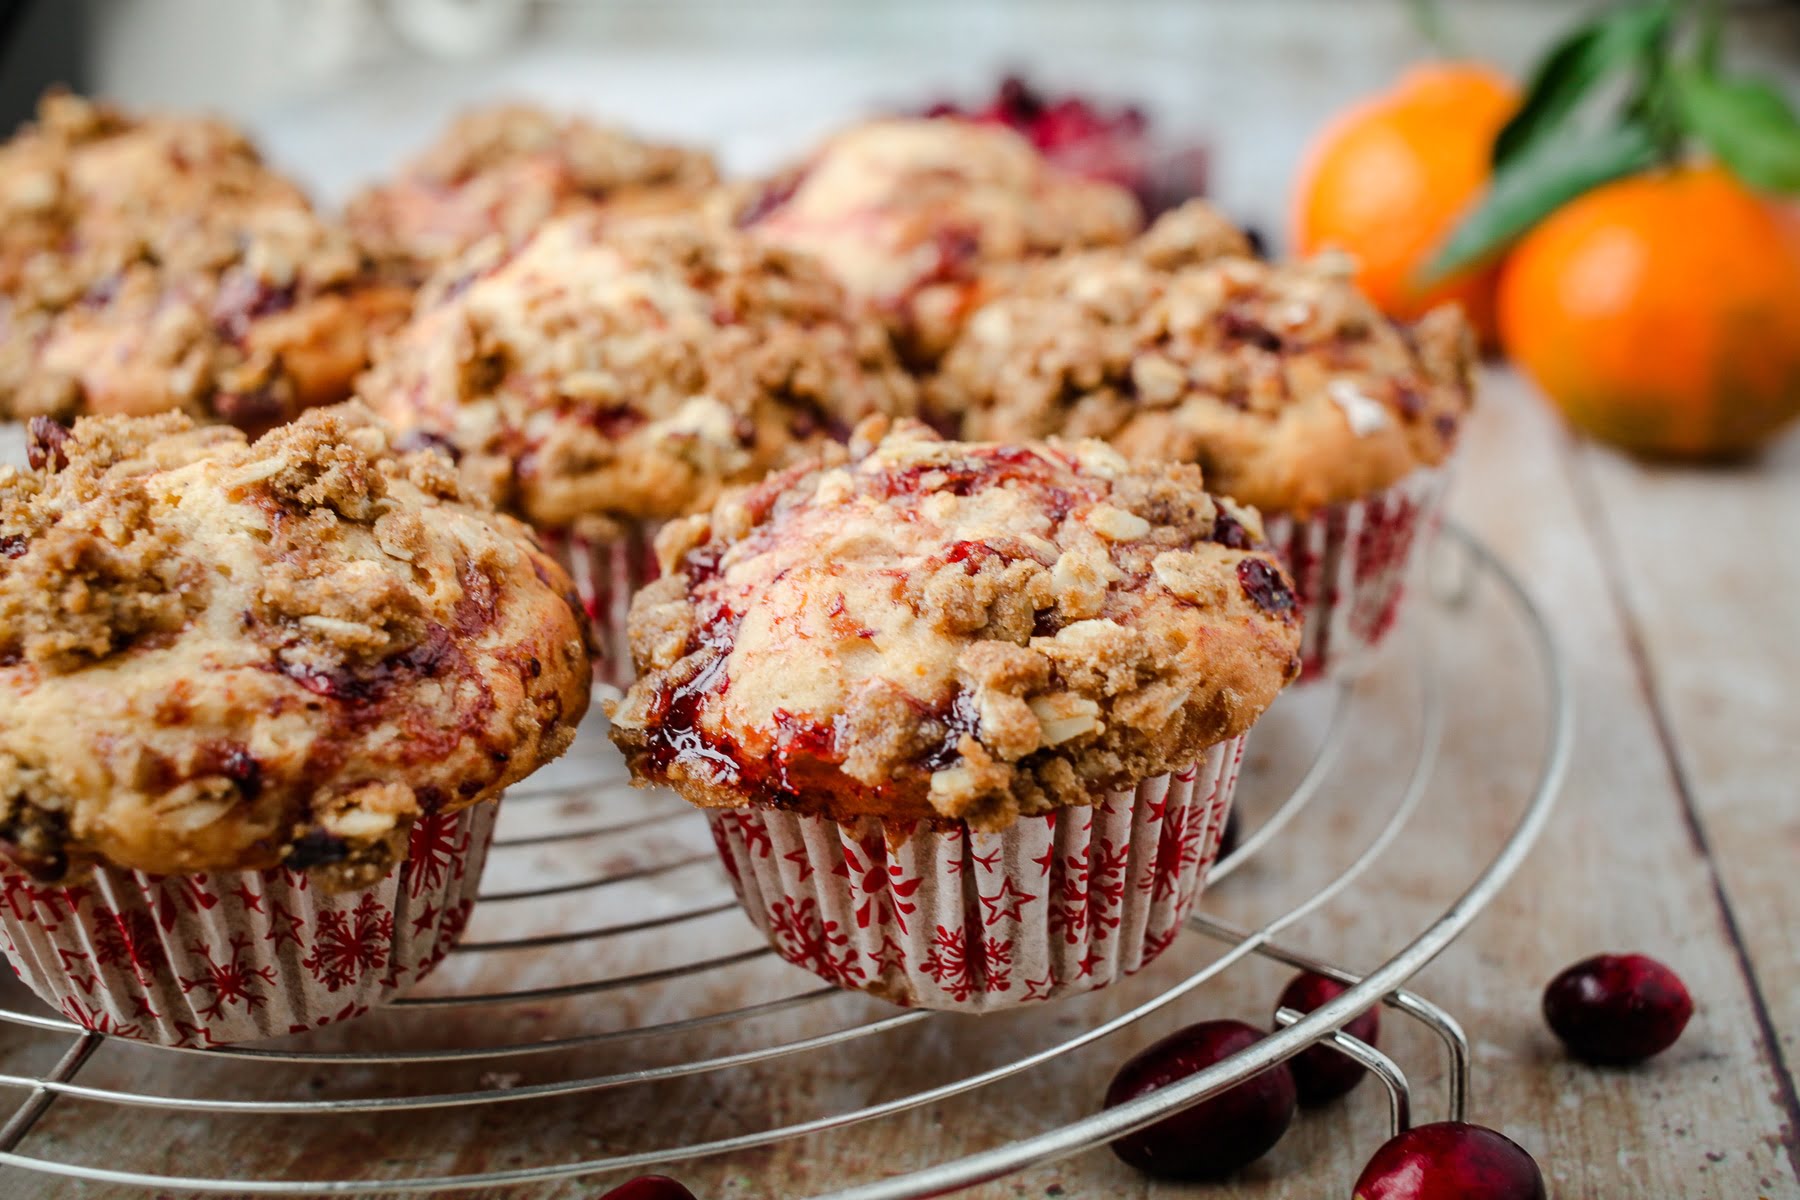 Leftover Cranberry Sauce Muffins With Streusel Topping Wallflower Kitchen,Best Card Games For Two People